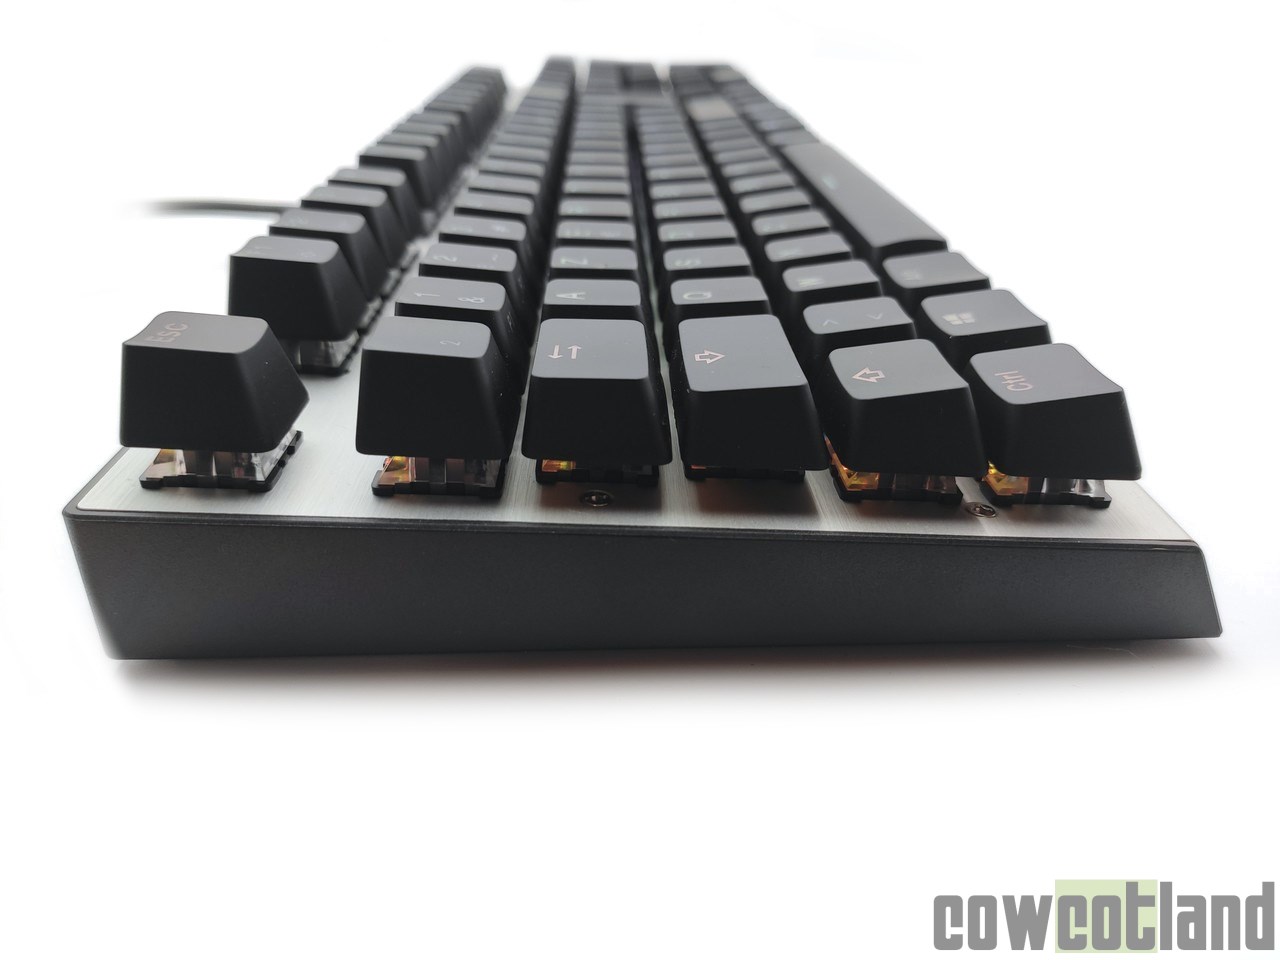 Image 46355, galerie Test clavier mcanique Cooler Master CK351 : switches optiques et hot-swappables !